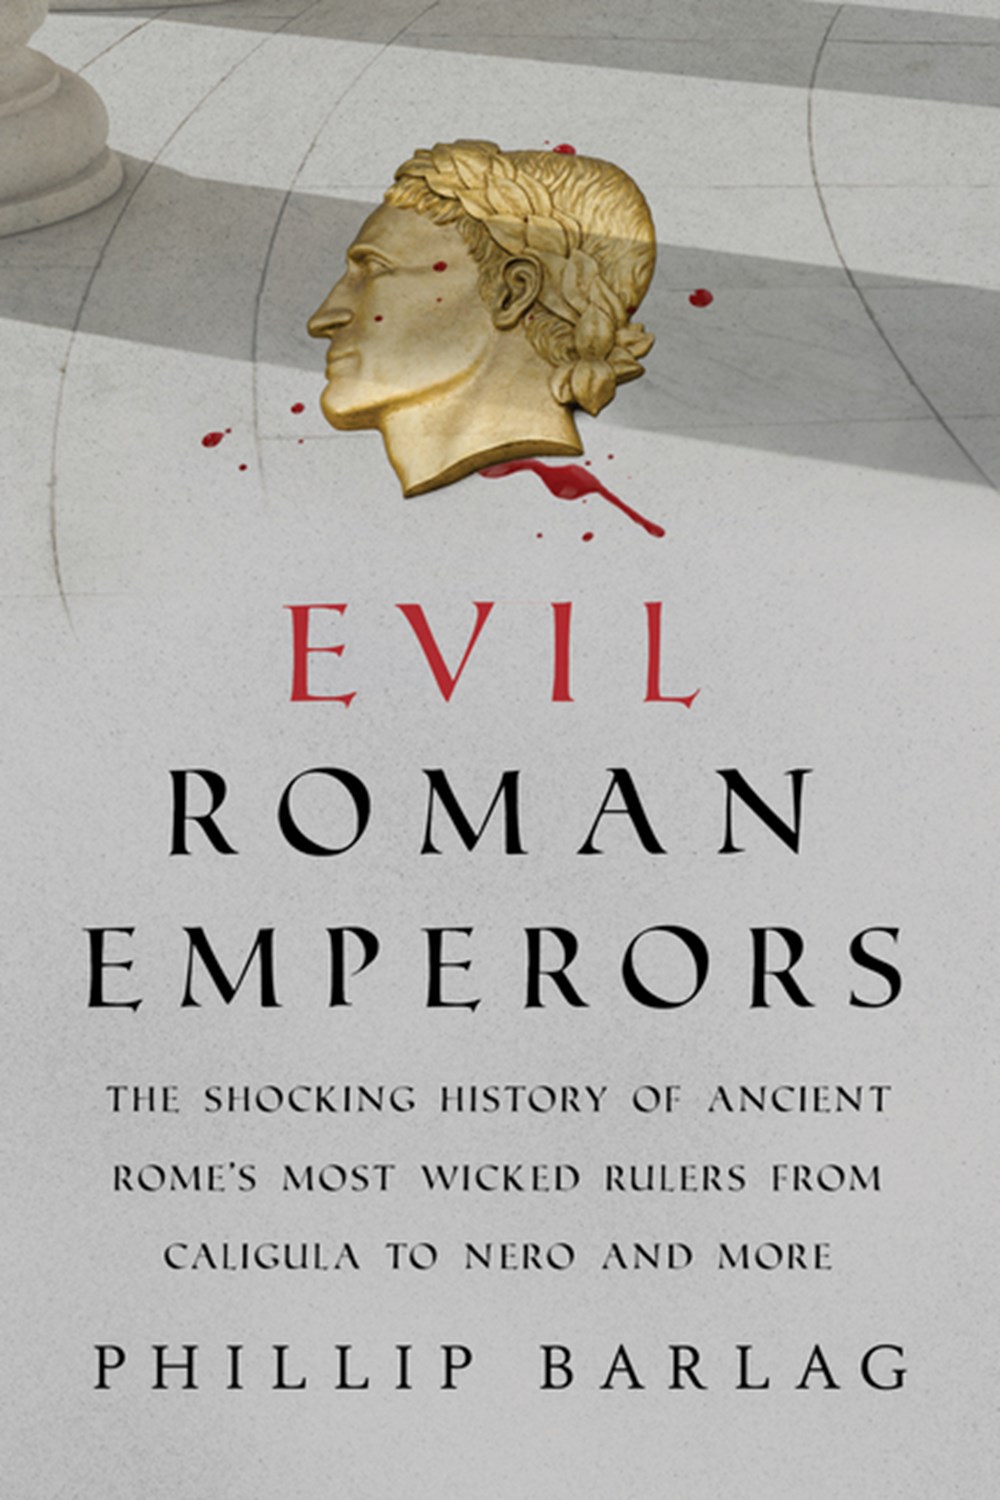 Evil Roman Emperors: The Shocking History of Ancient Rome's Most Wicked Rulers from Caligula to Nero